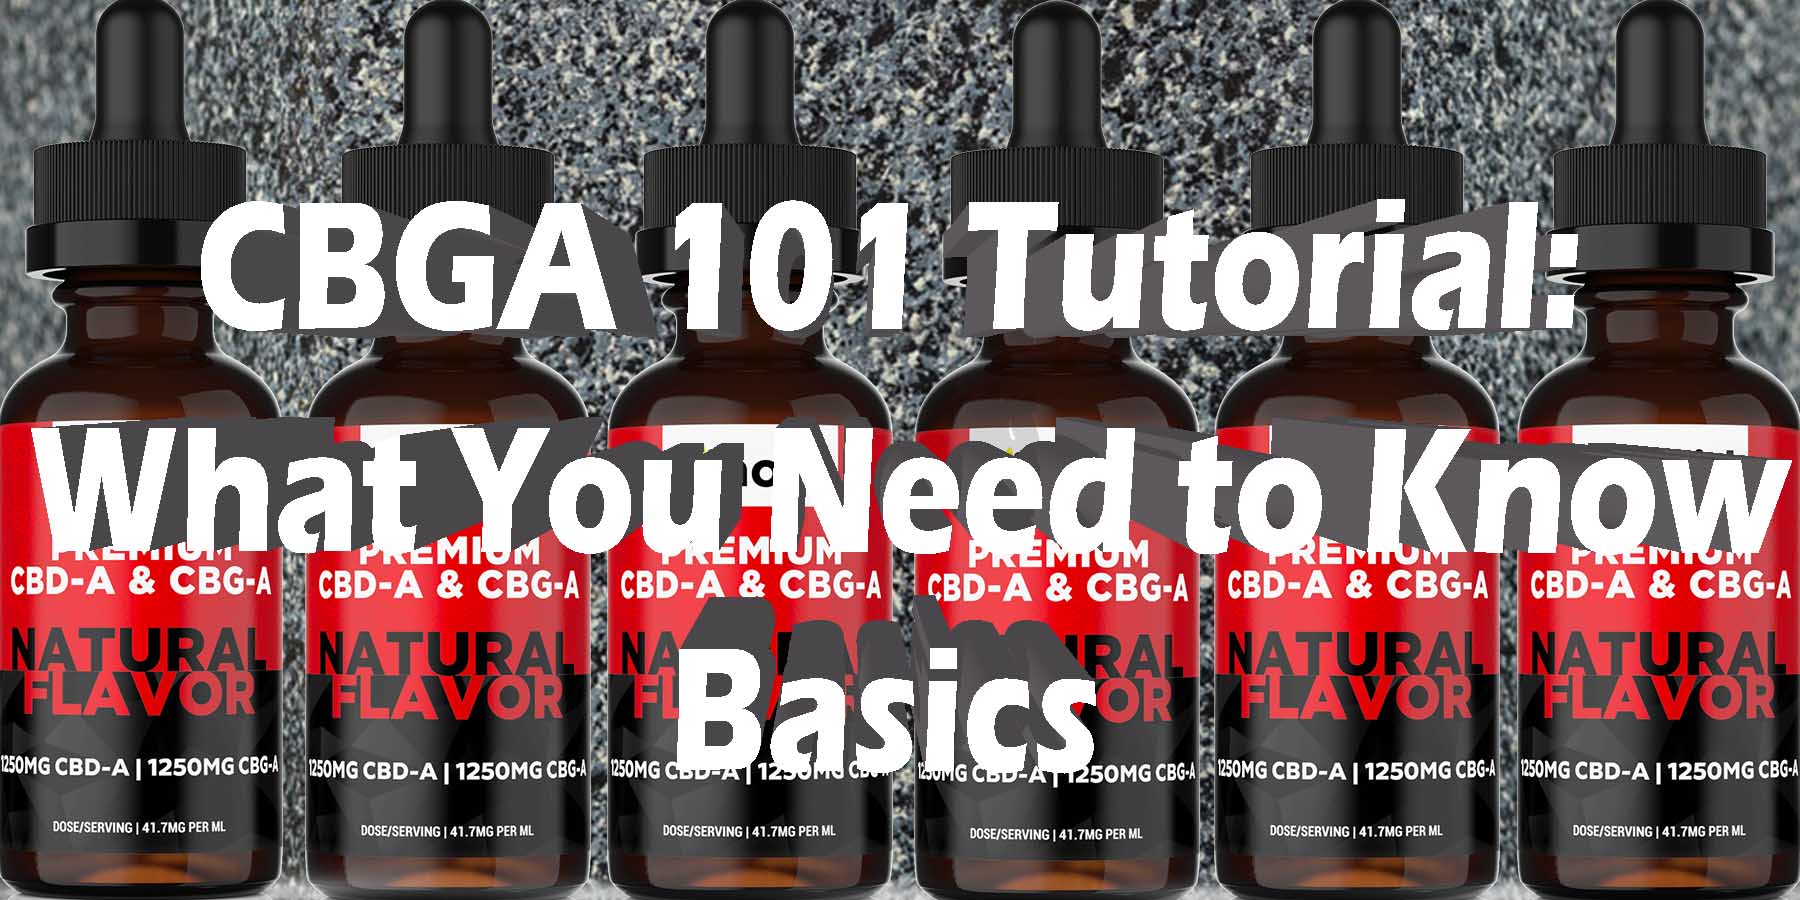 CBGA 101 Tutorial What You Need to Know Basics Discount For Smoking High Smoke Shop Online Near Me Strongest Binoid Buy Online BestPlace LowestPrice Coupon Binoid